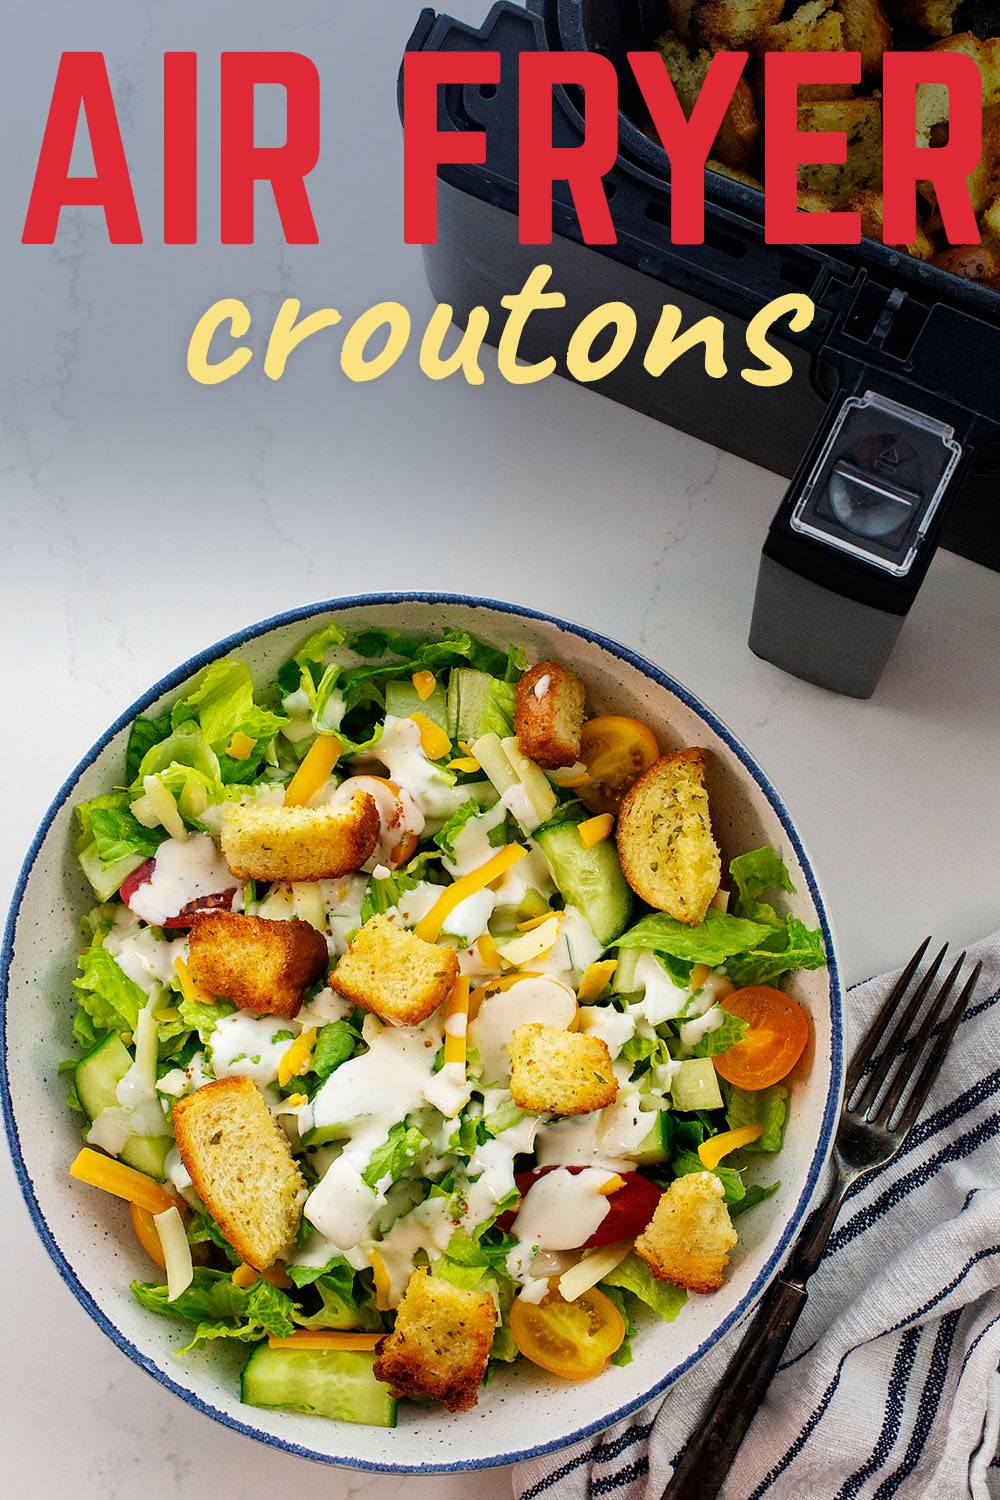 These air fried croutons give a nice, crunchy texture to your salad!